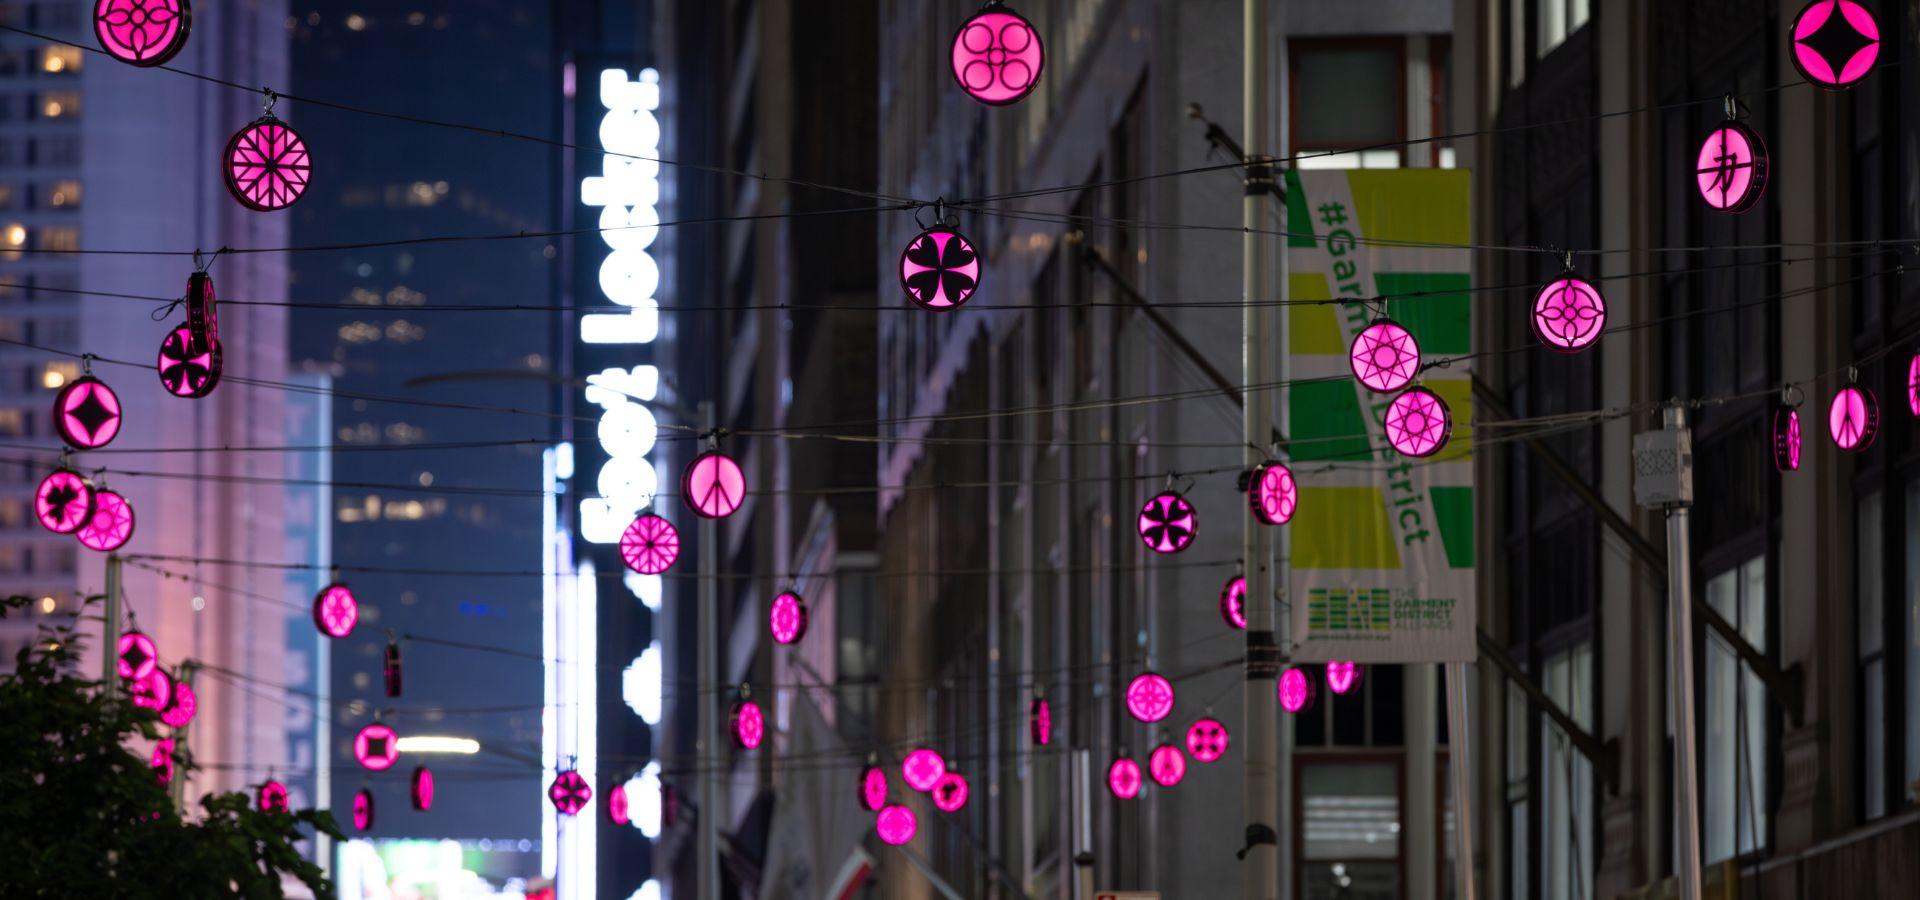 Magenta colored lanterns with symbols, hanging about the streets of Midtown